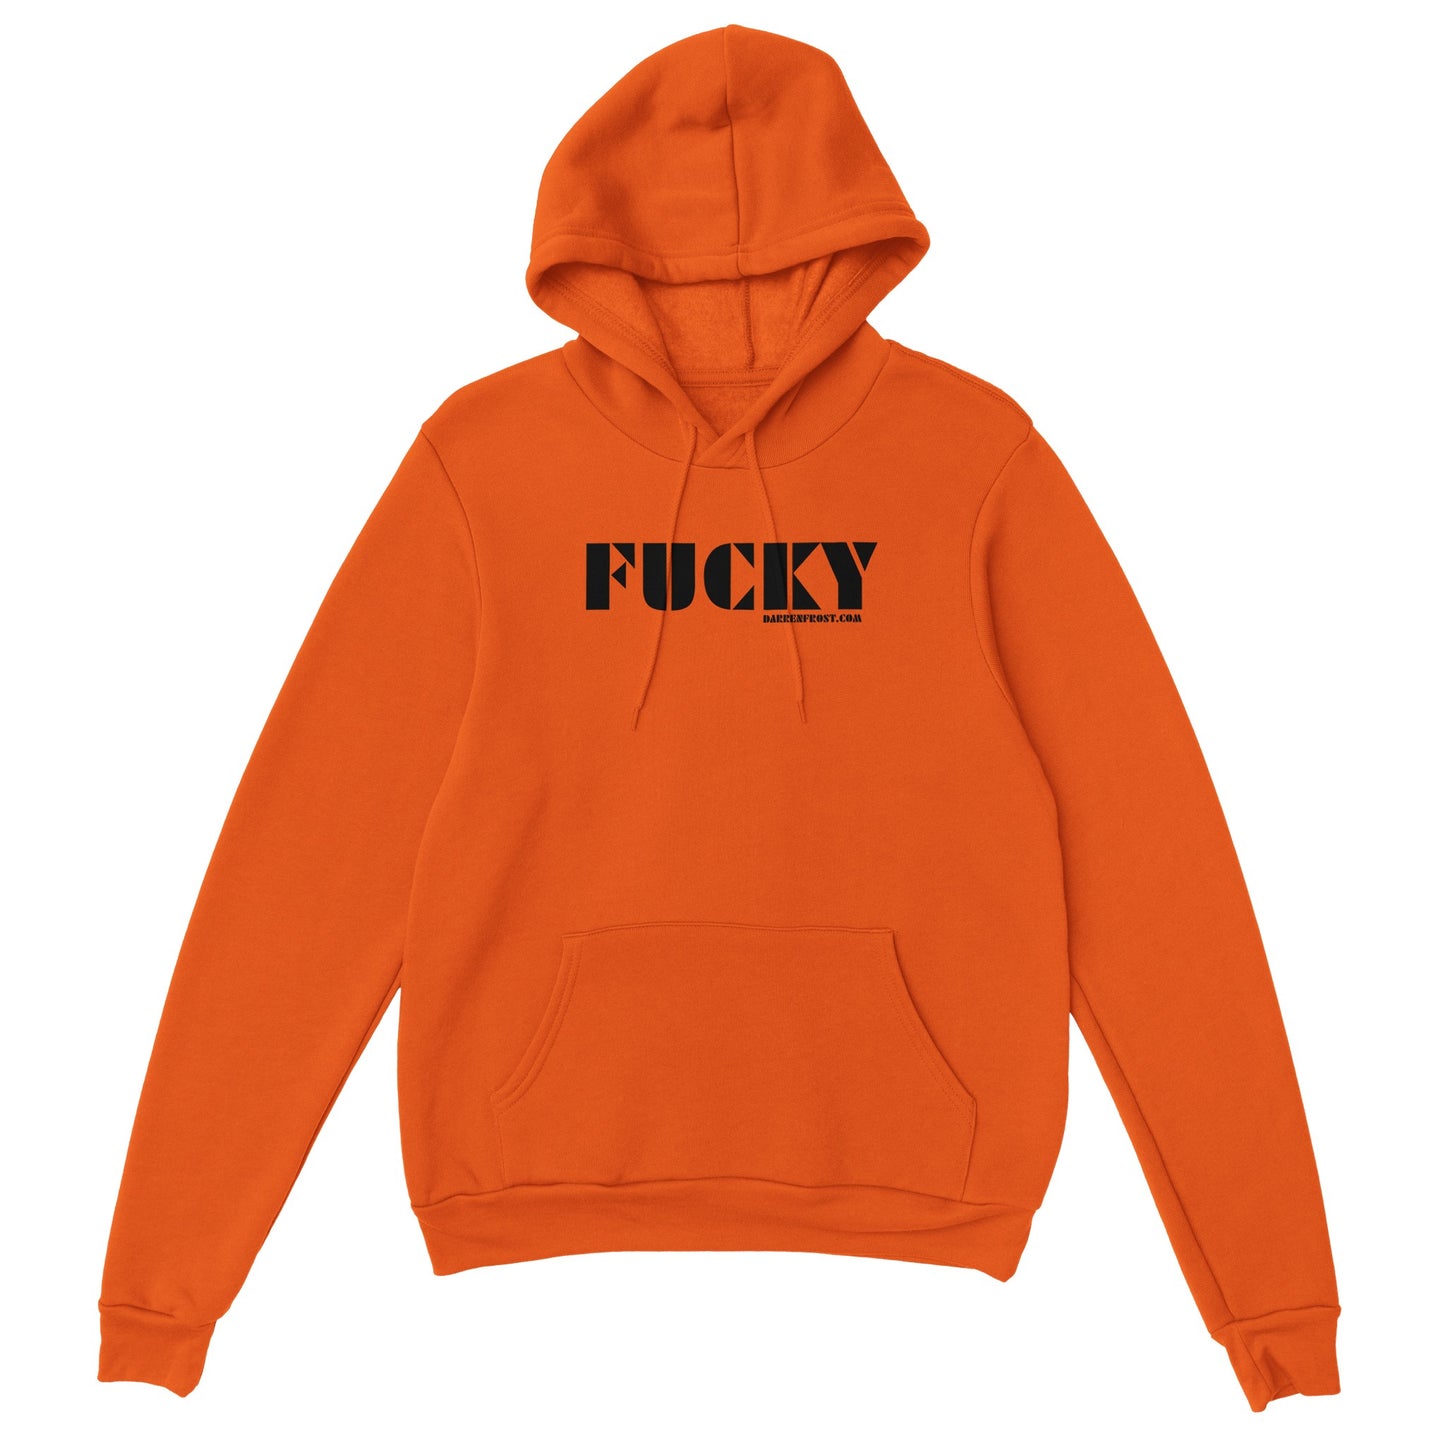 The funky FUCKY - Classic Unisex Pullover Hoodie